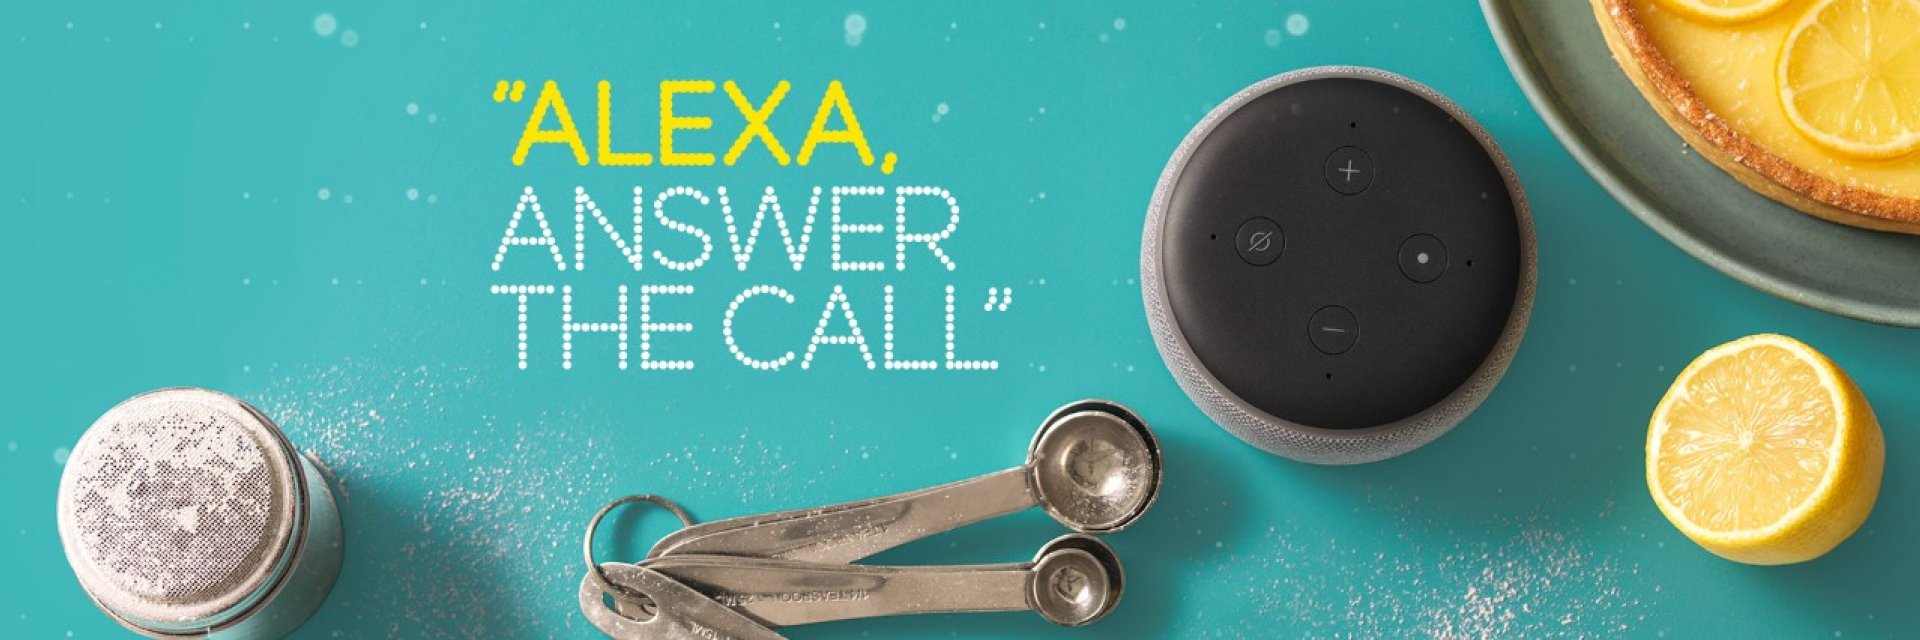 Amazon Echo on a kitchen top with words "Alexa, answer the call" 